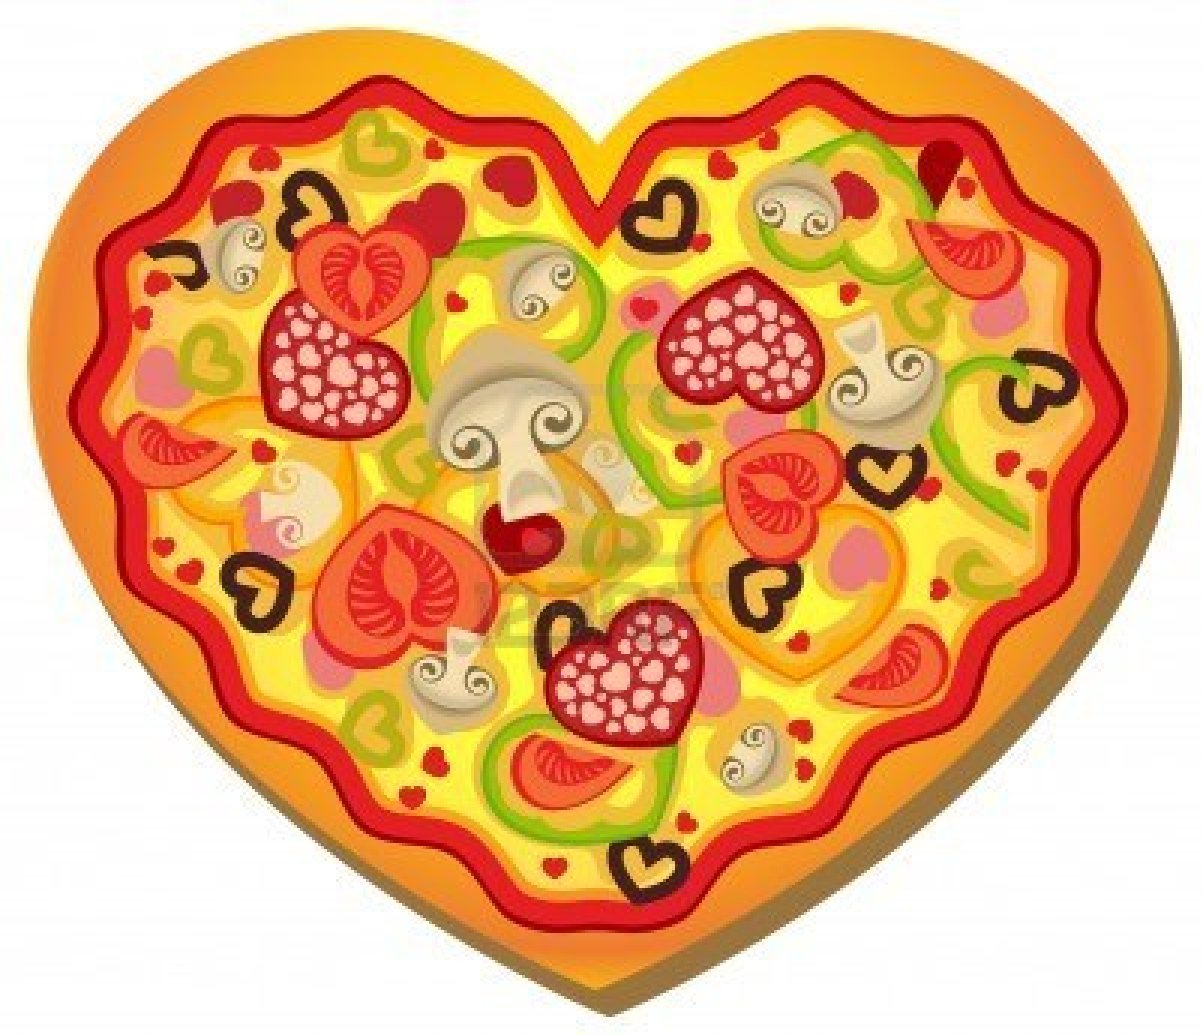 Really Love Pizza Dexter Patch Announced Today That Yet Another Pizza